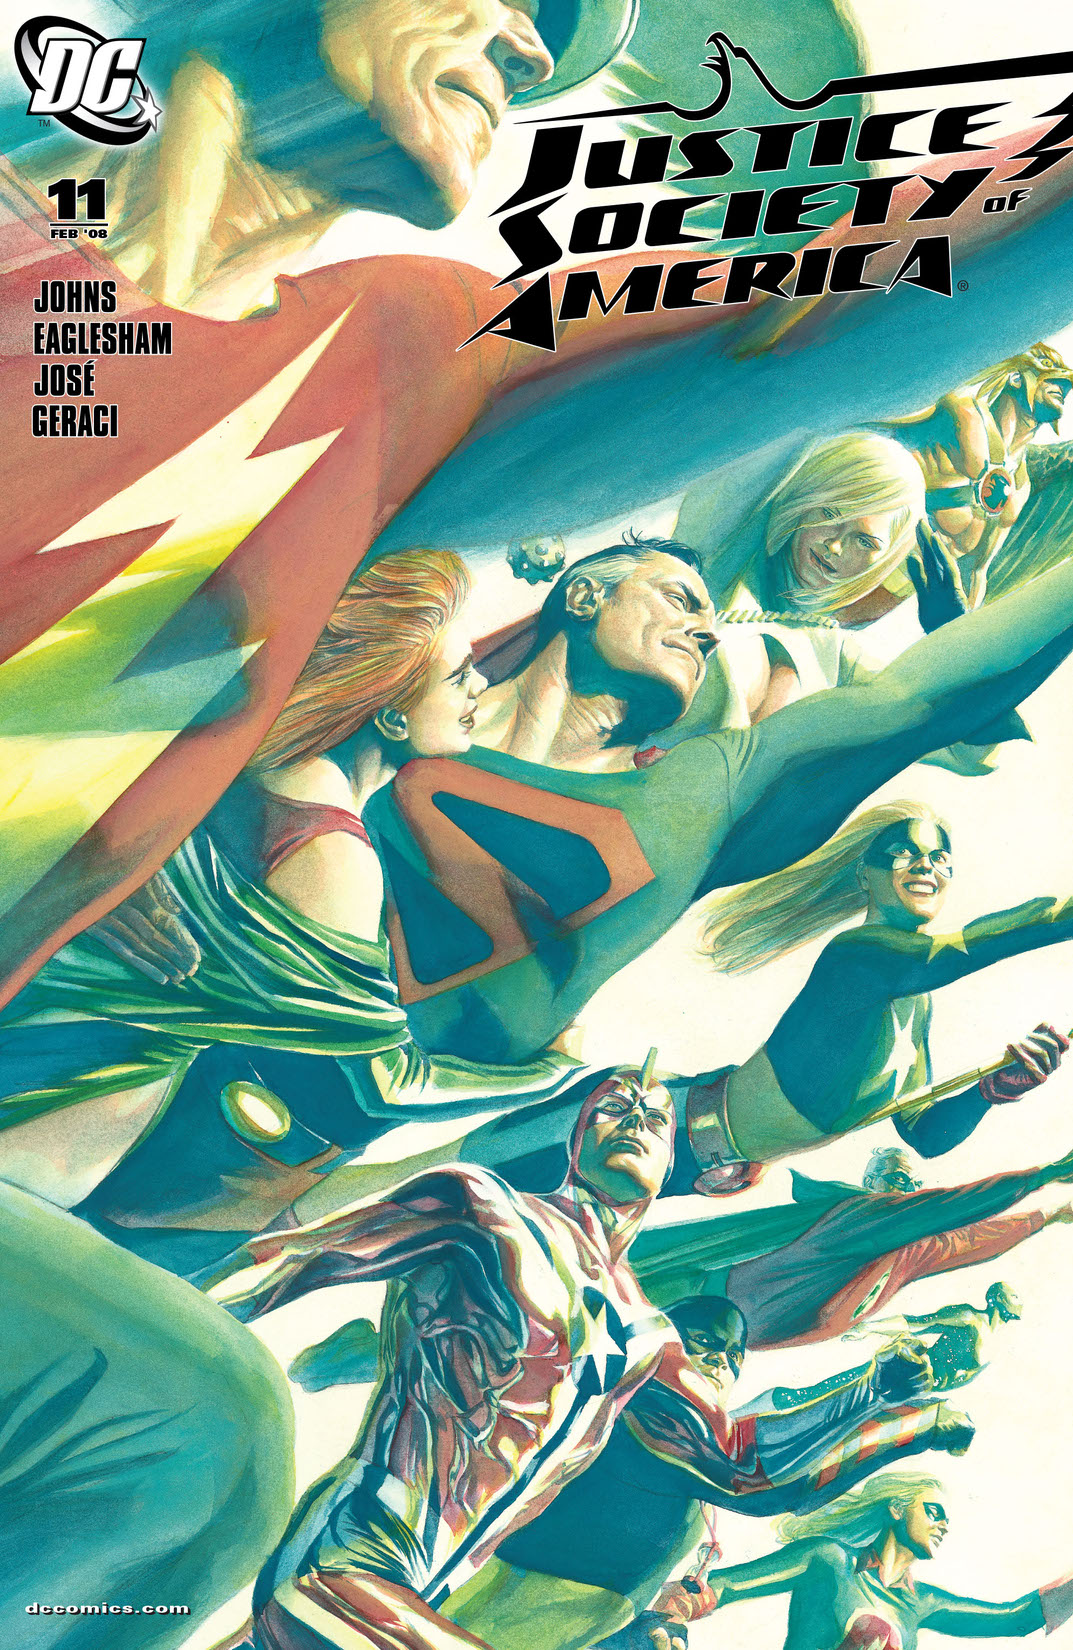 Justice Society of America (2006-) #11 preview images